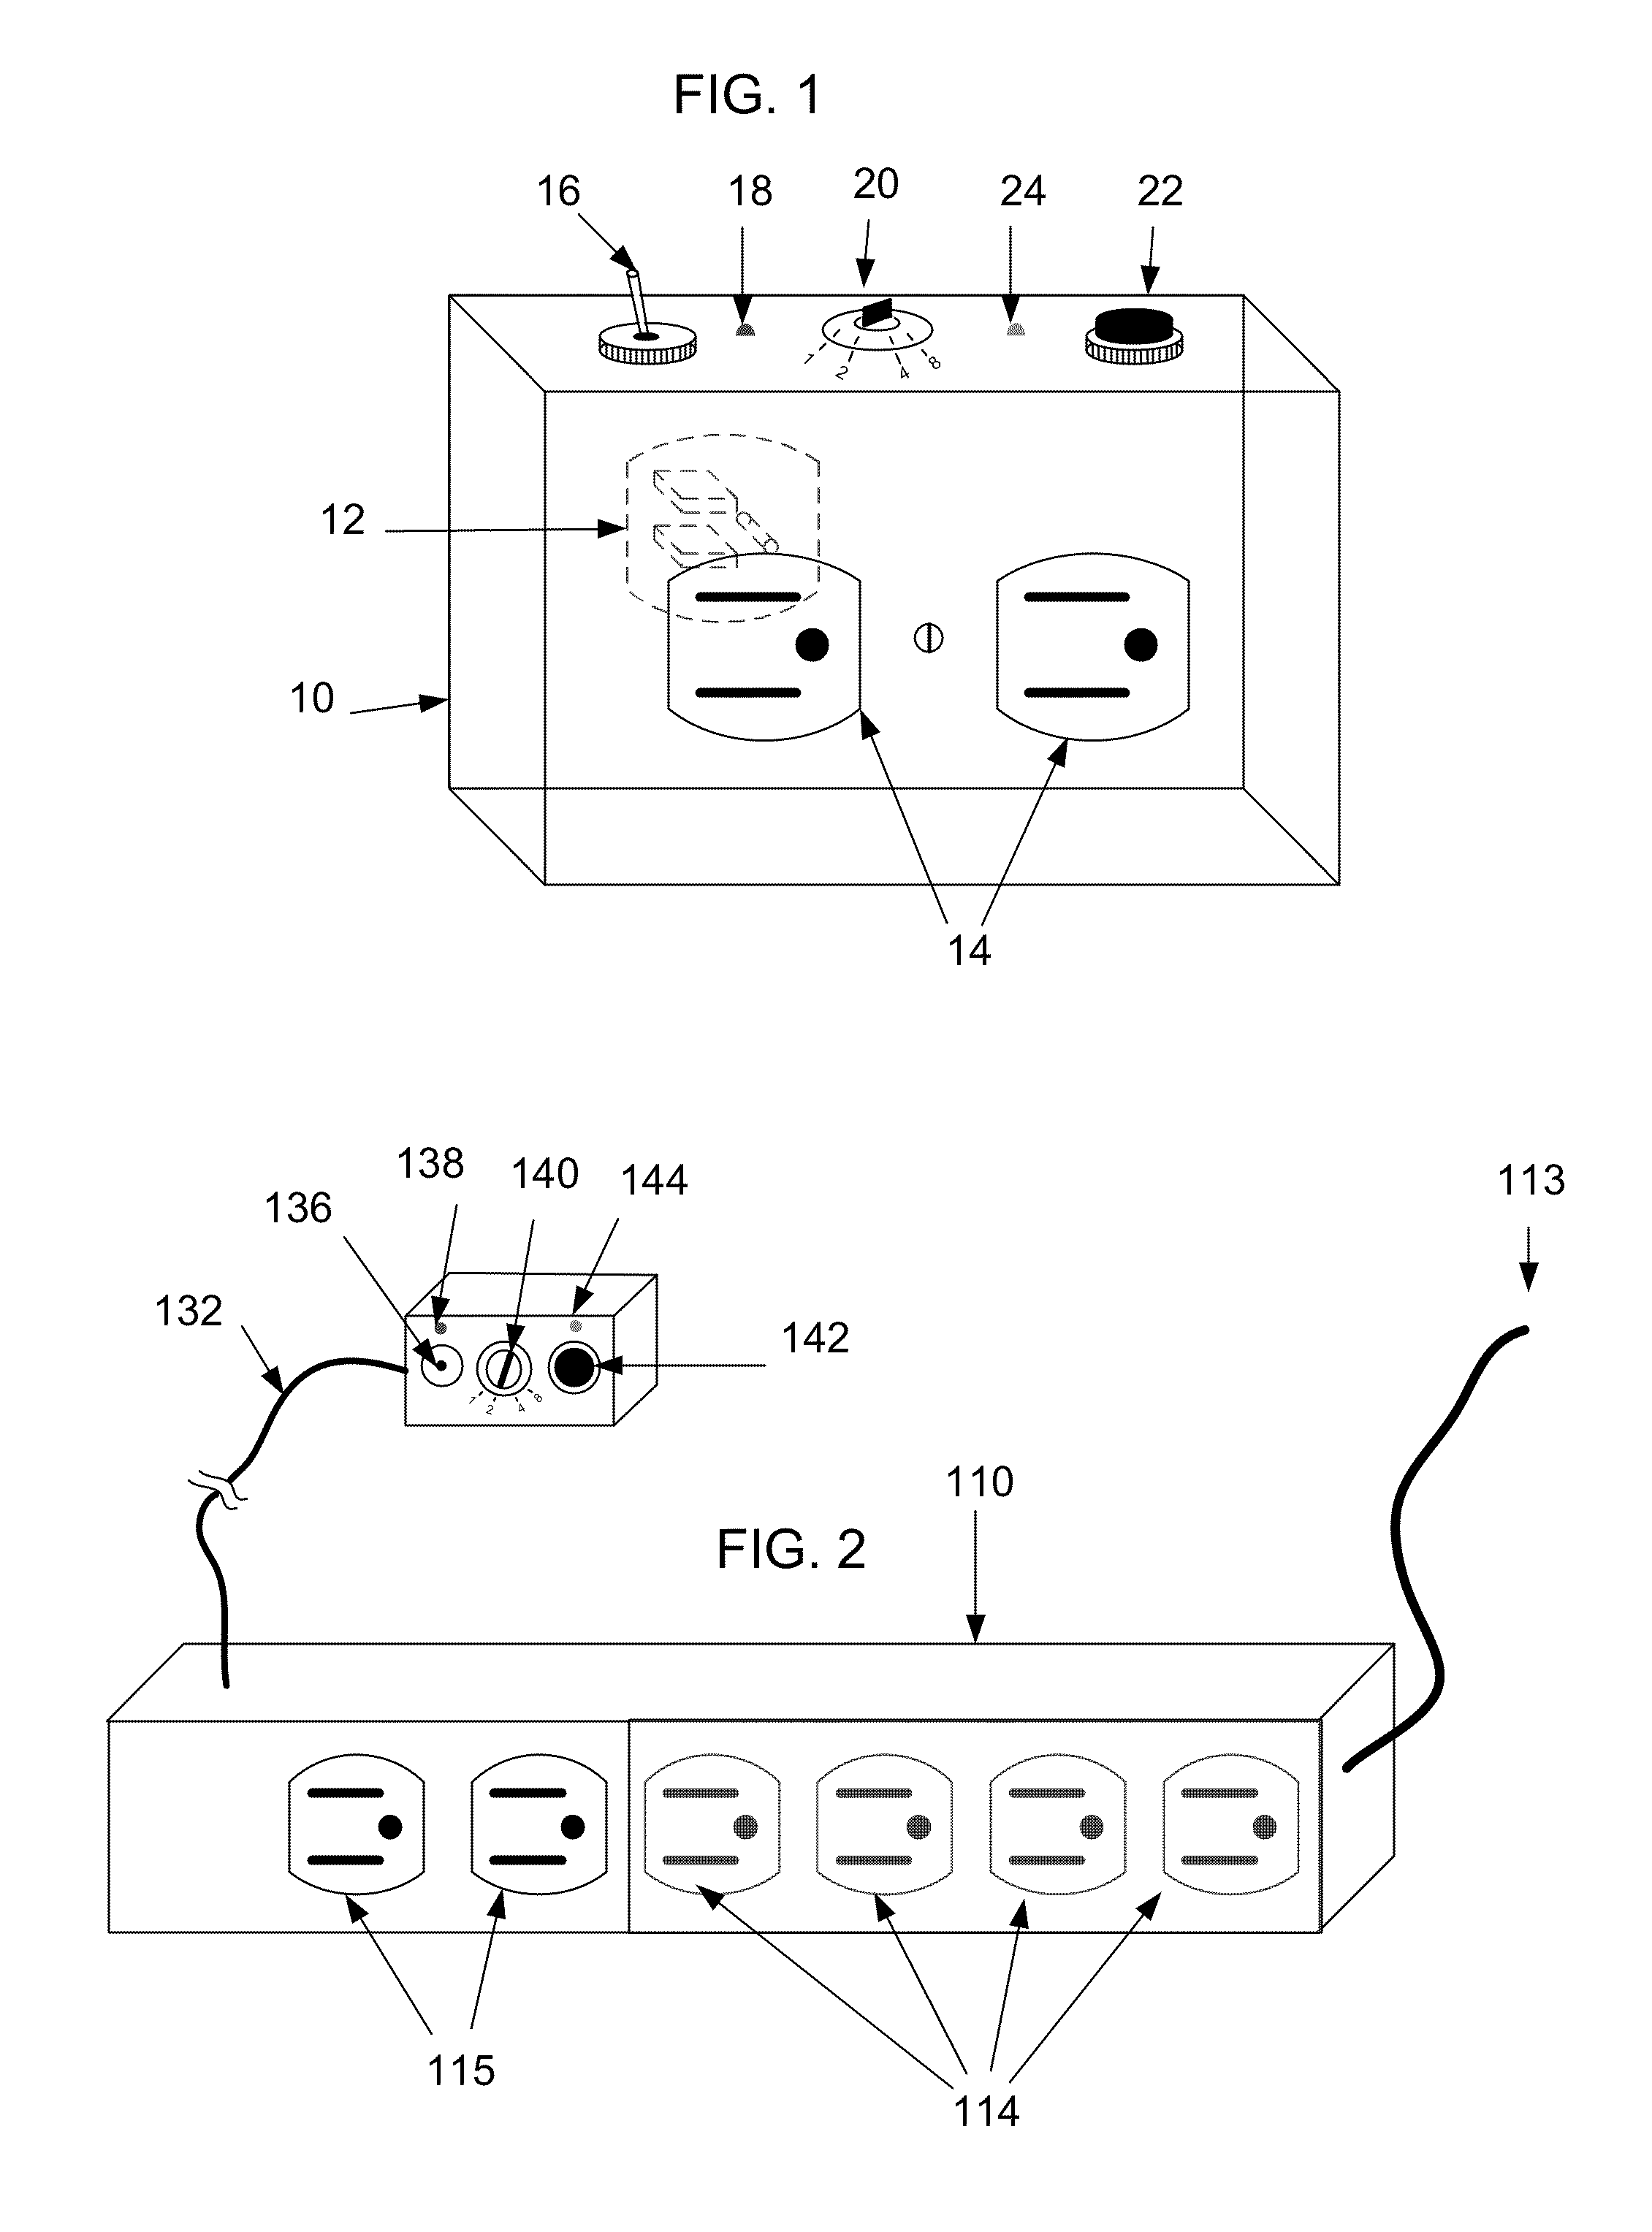 Electrical timer apparatus and a system for disconnecting electrical power